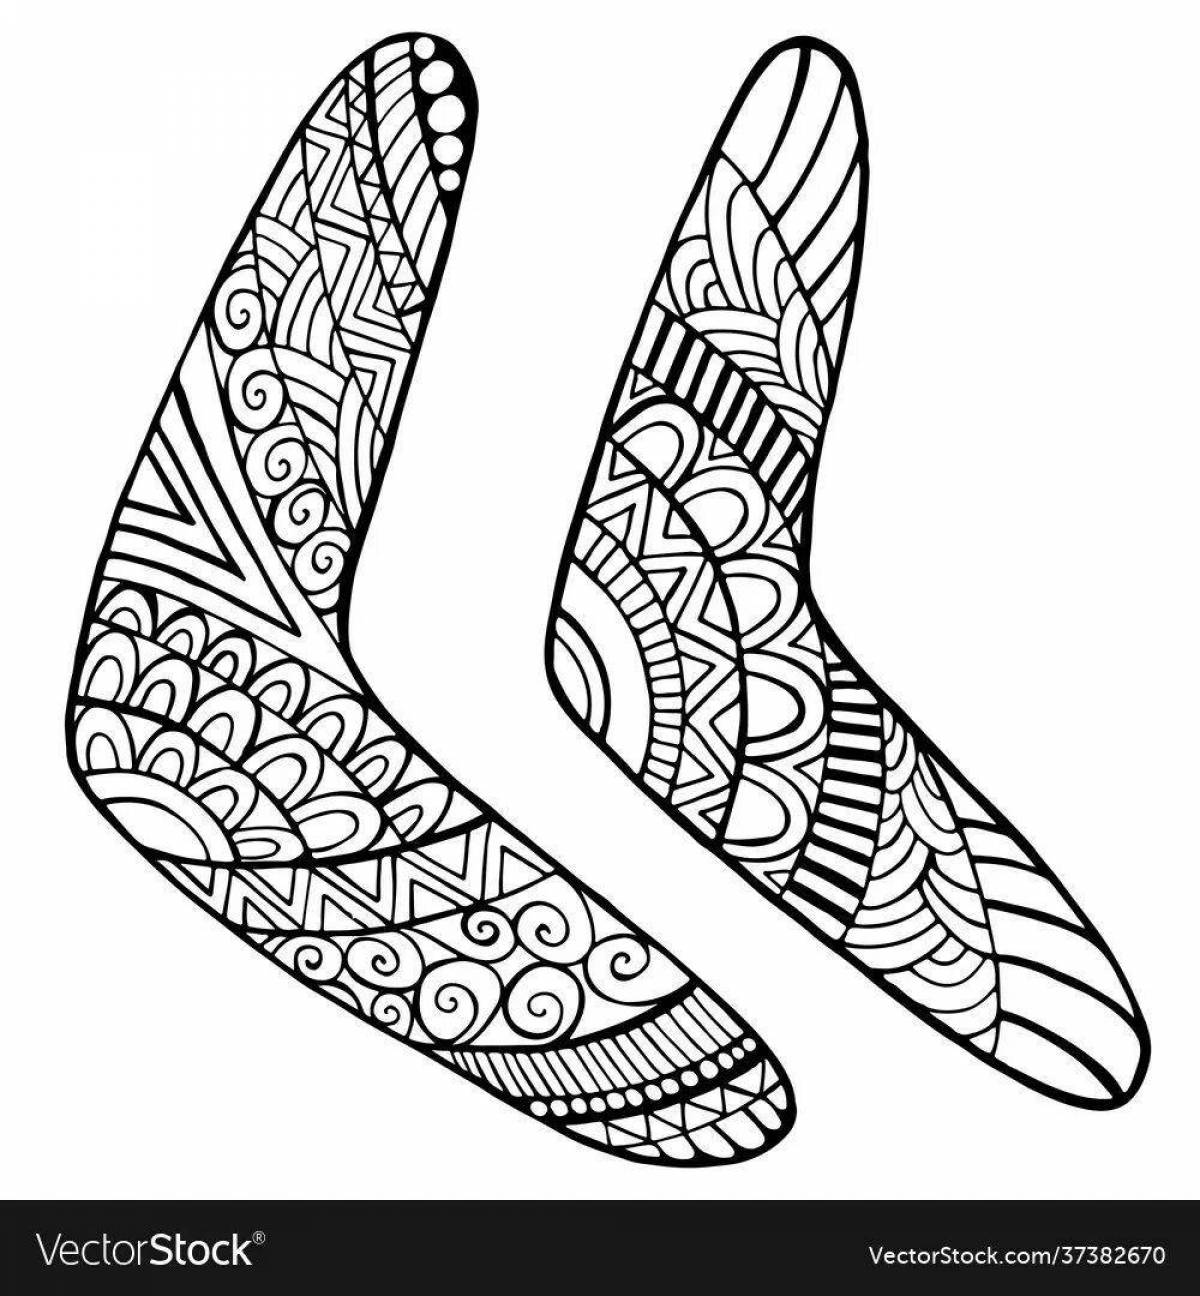 Boomerang coloring pages for kids